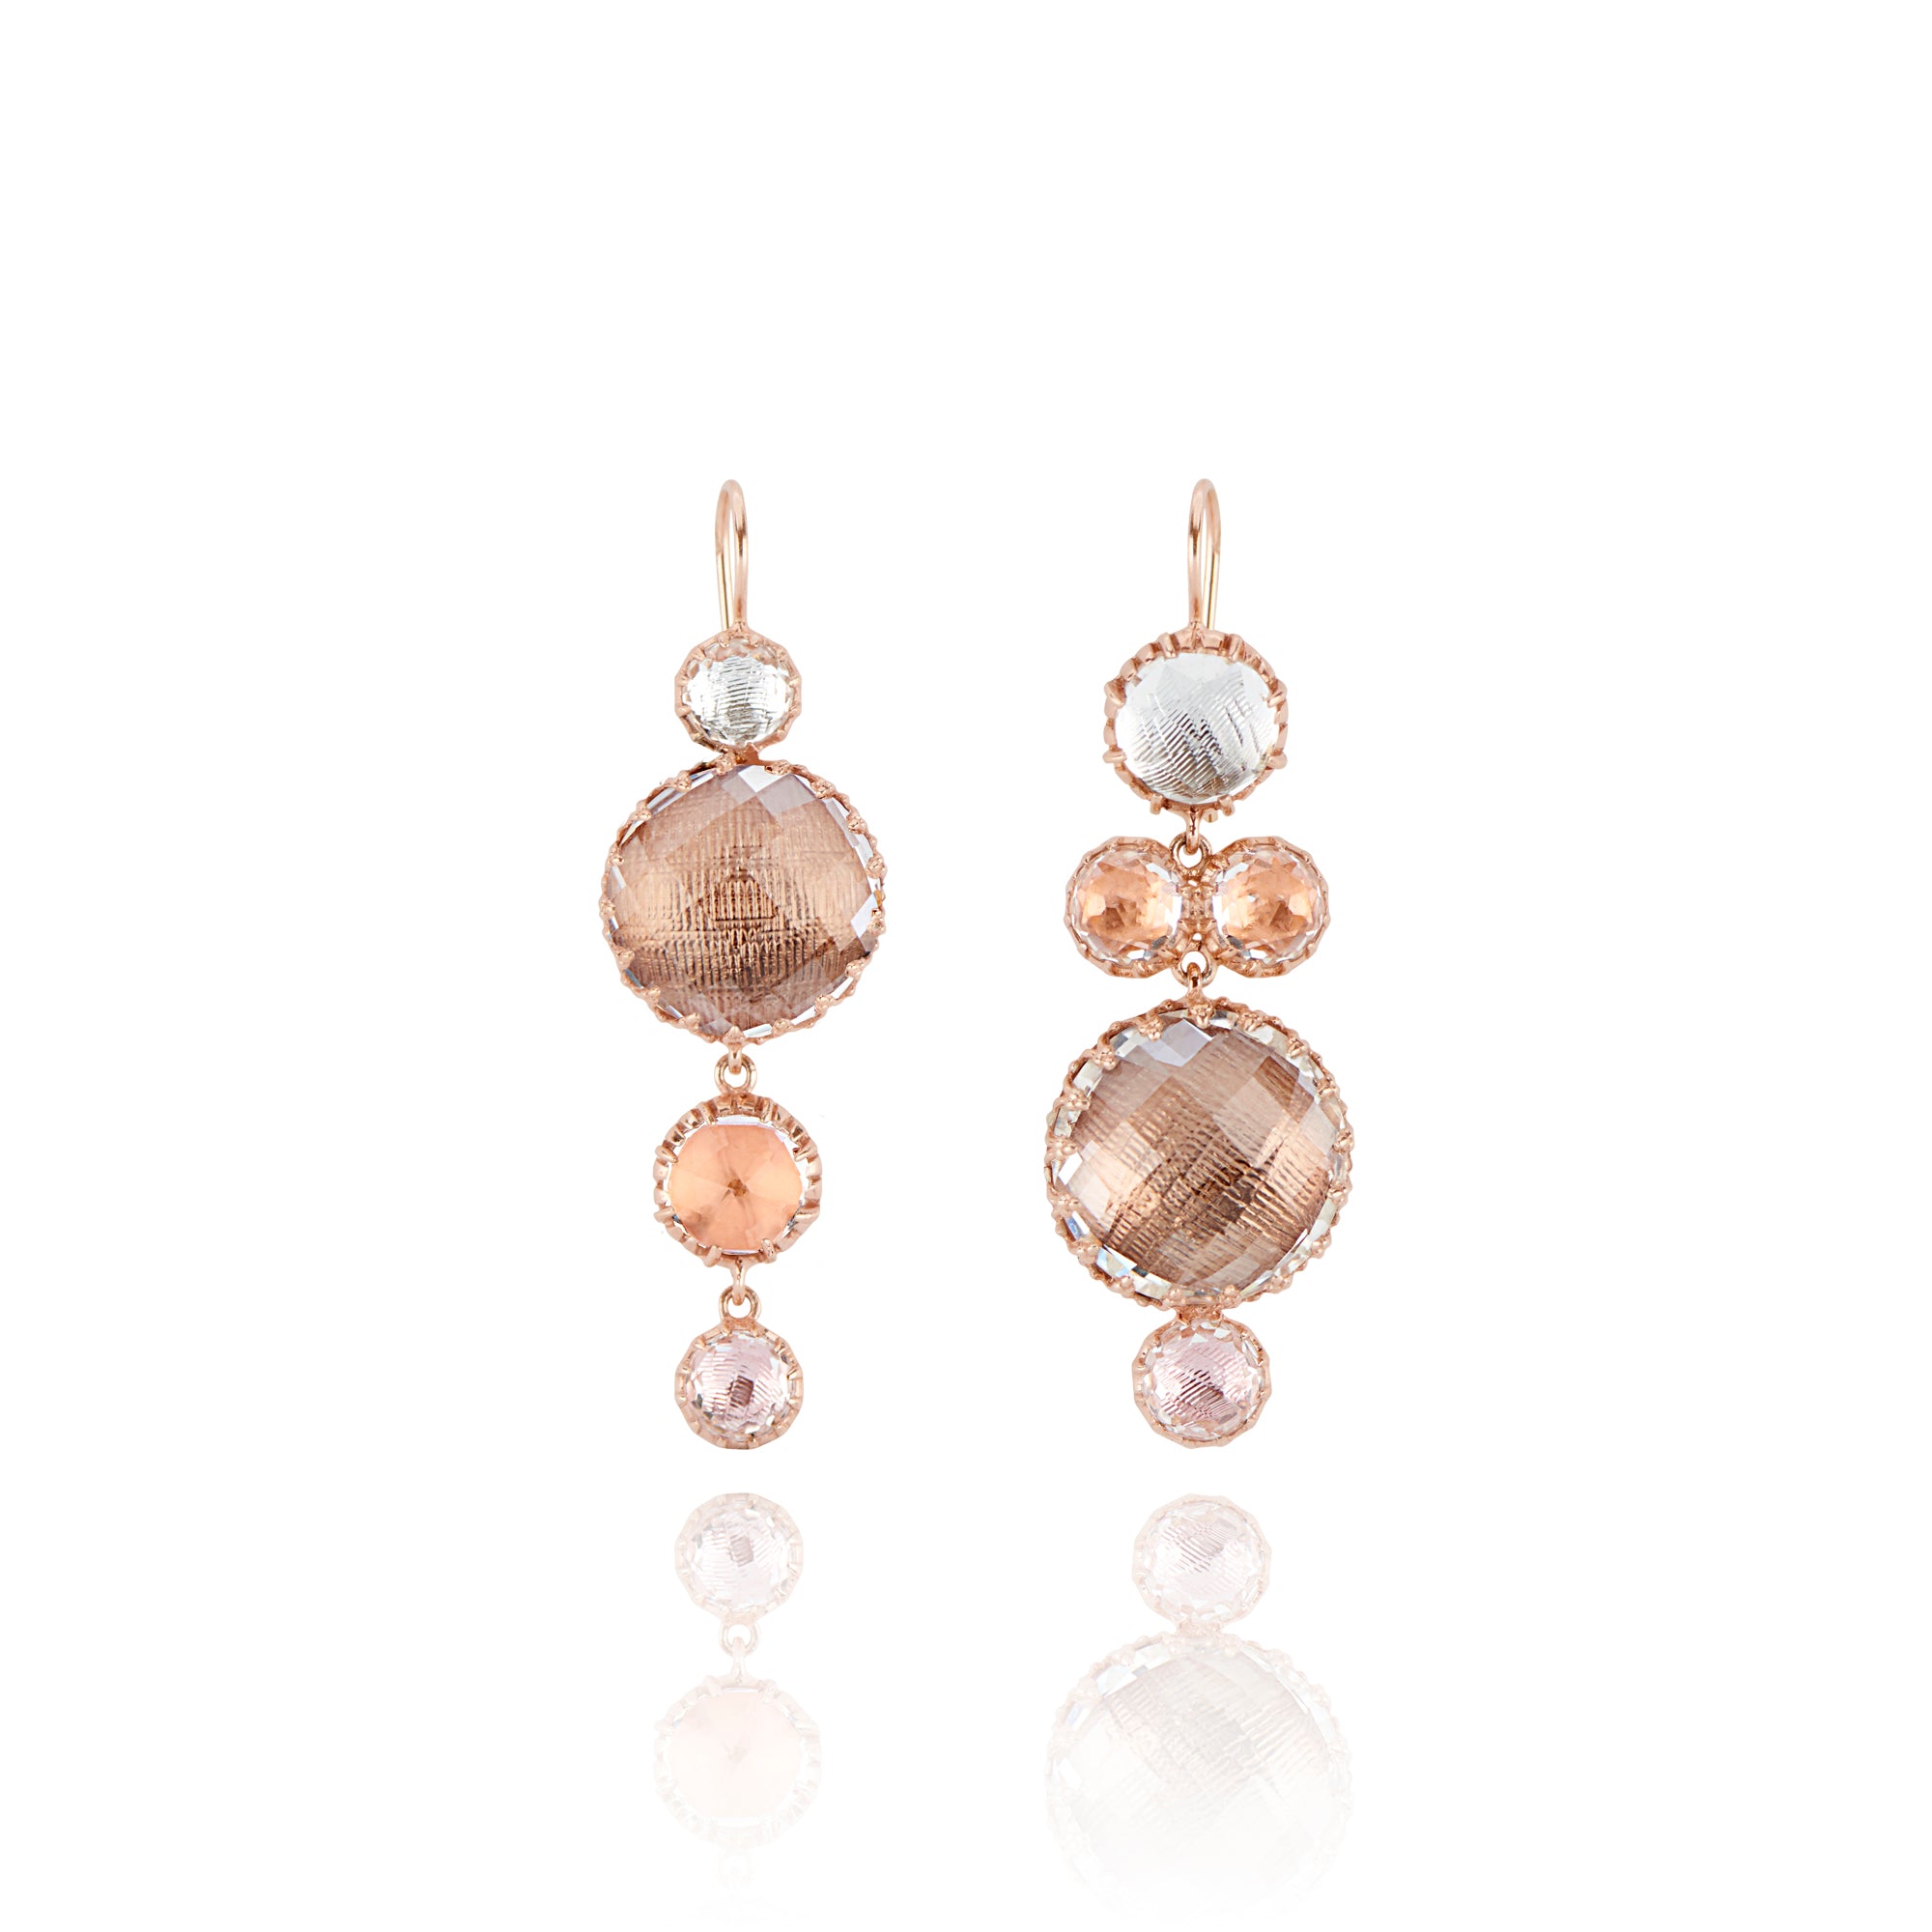 Sadie Mis-Matched Bubble Earrings (Black Rhodium or Rose Gold Wash)